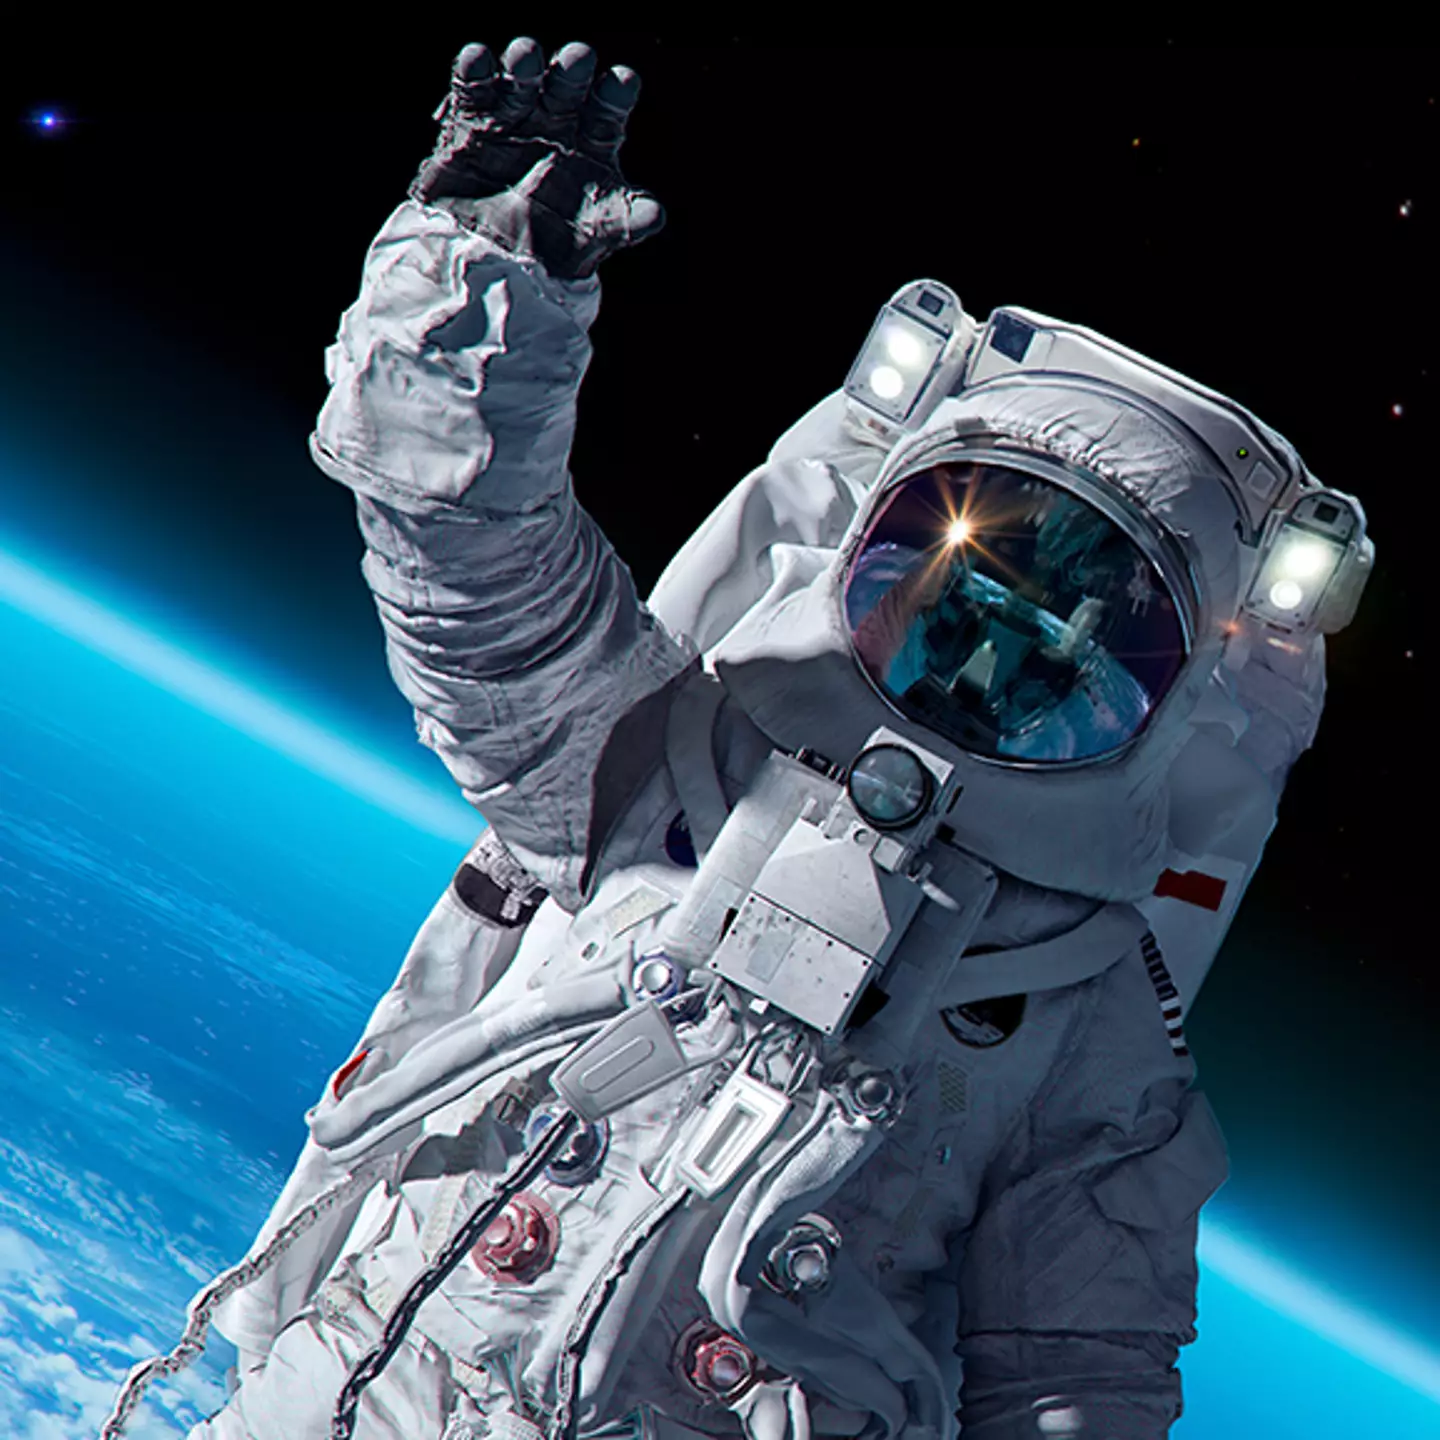 How much astronauts actually get paid is shocking